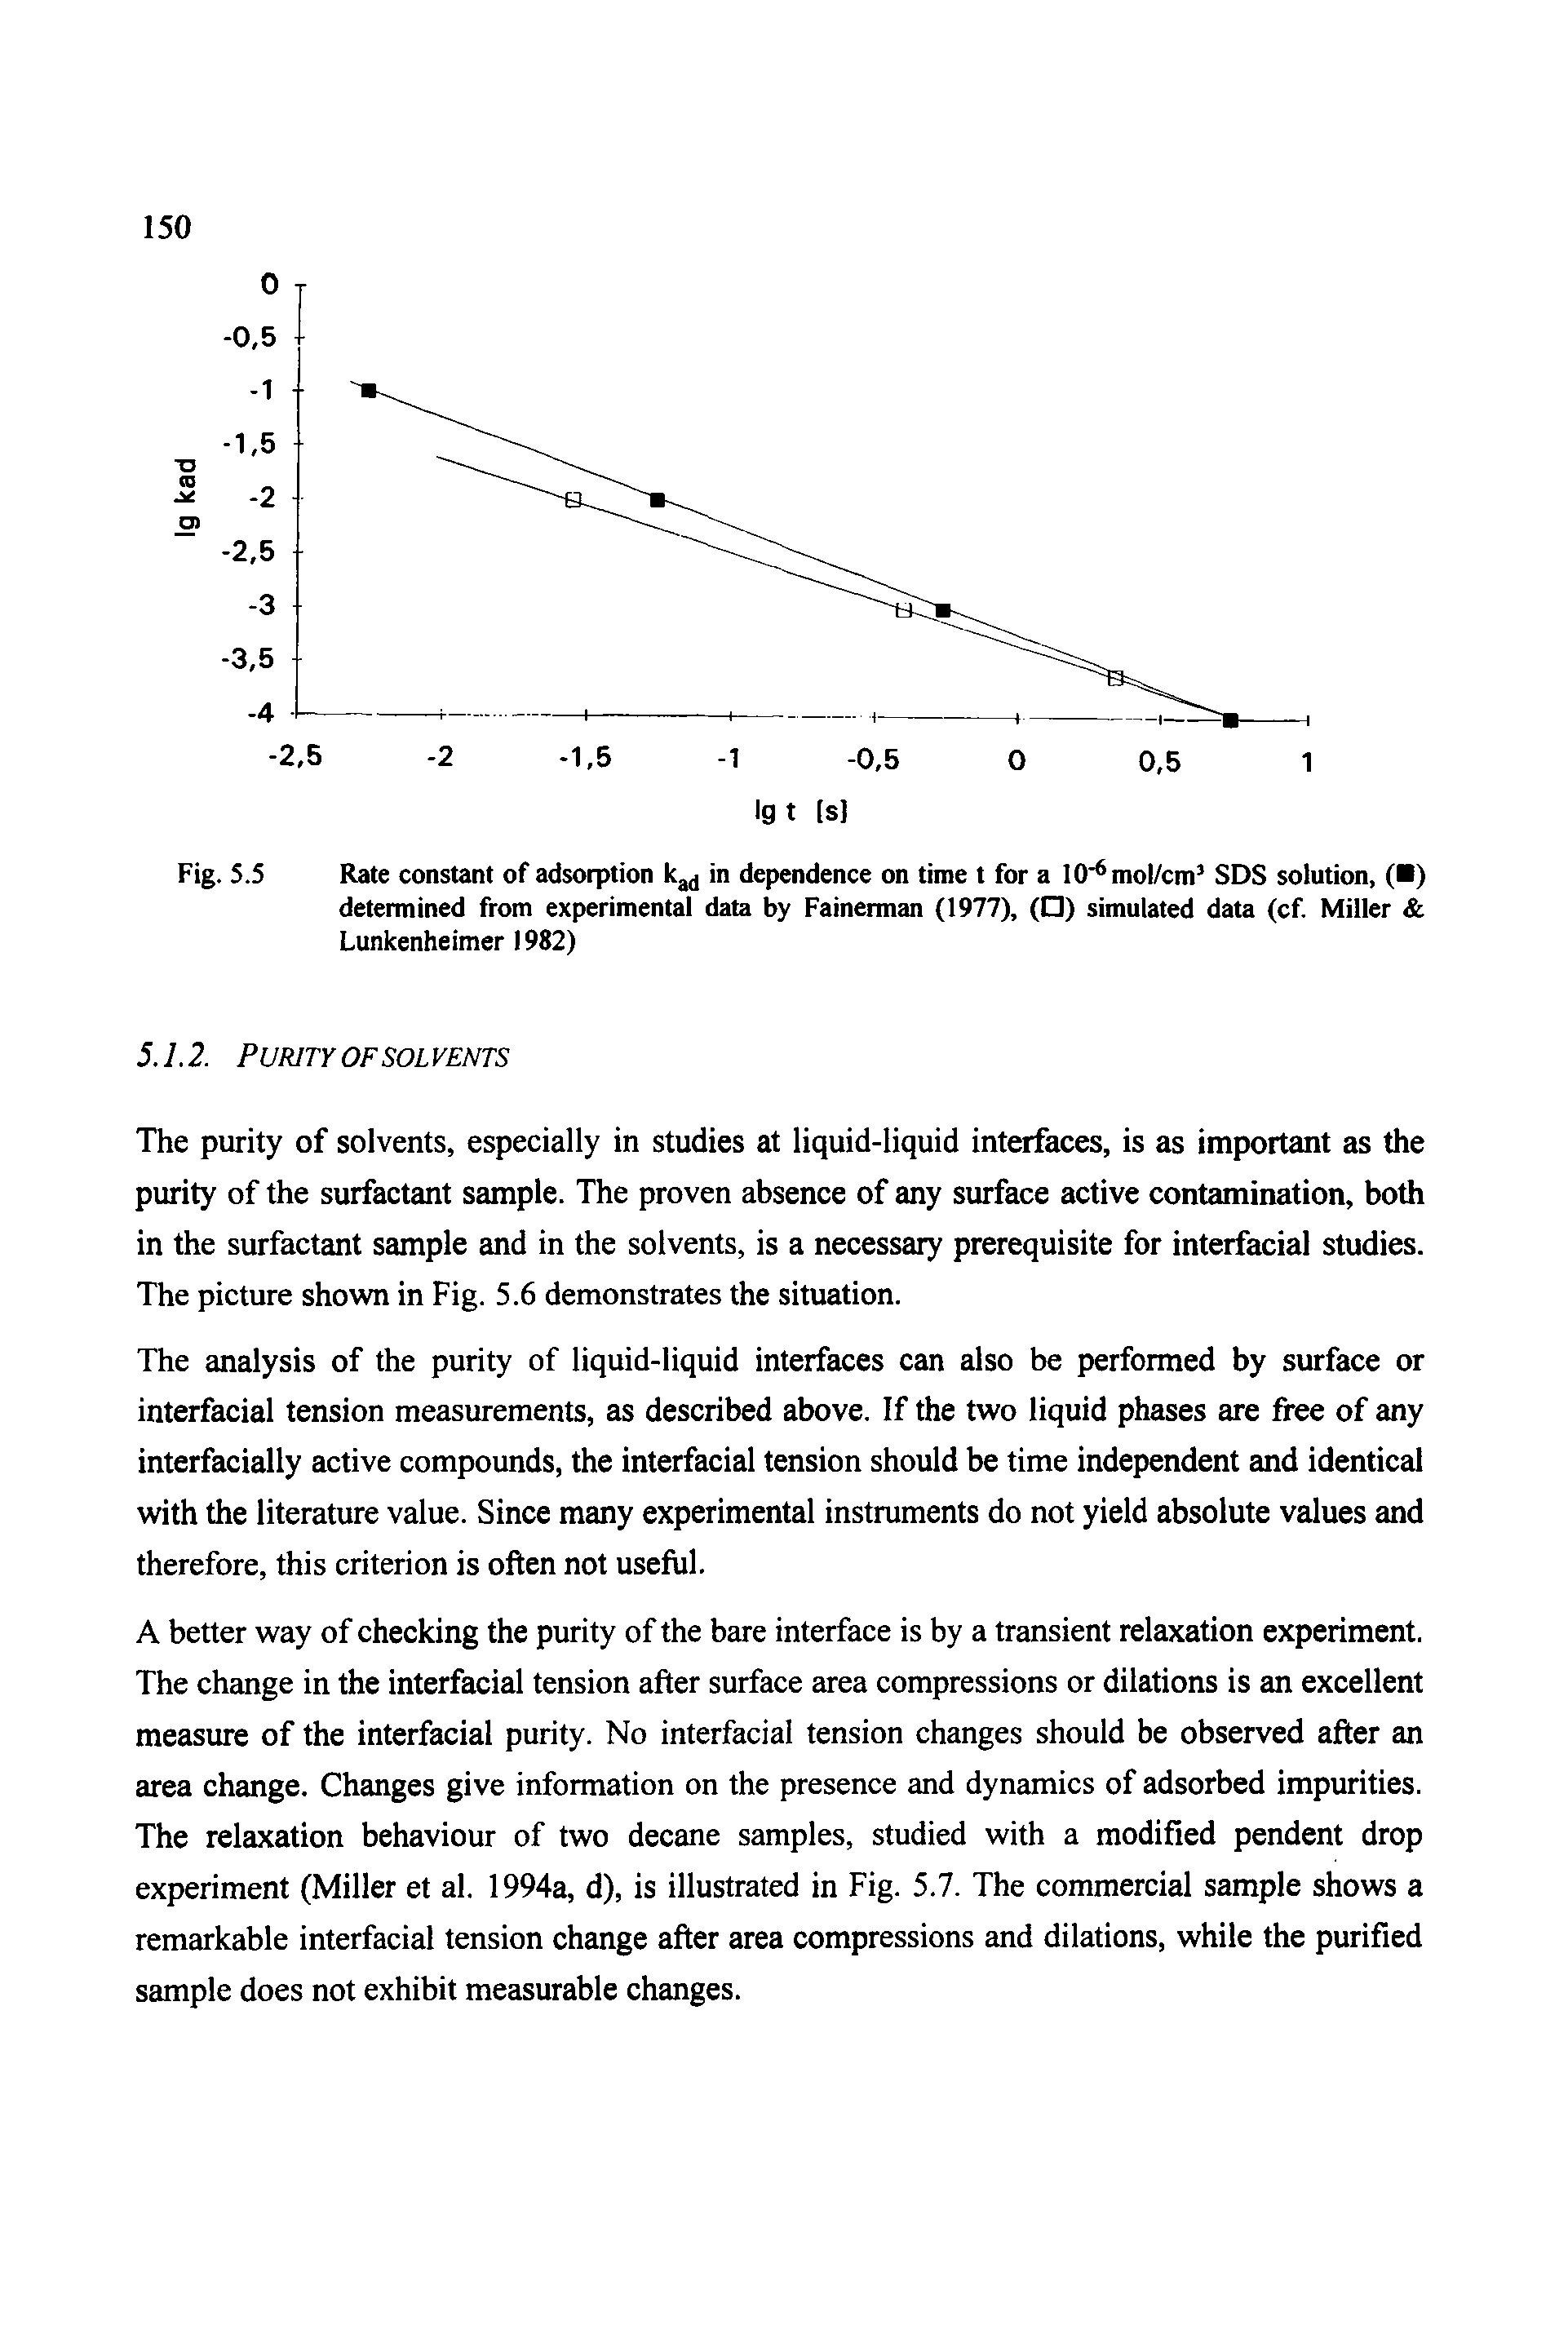 Fig. 5.5 Rate constant of adsorption in dependence on time t for a 10 mol/cm SDS solution, ( ) determined from experimental data by Fainerman (1977), ( ) simulated data (cf Miller Lunkenheimer 1982)...